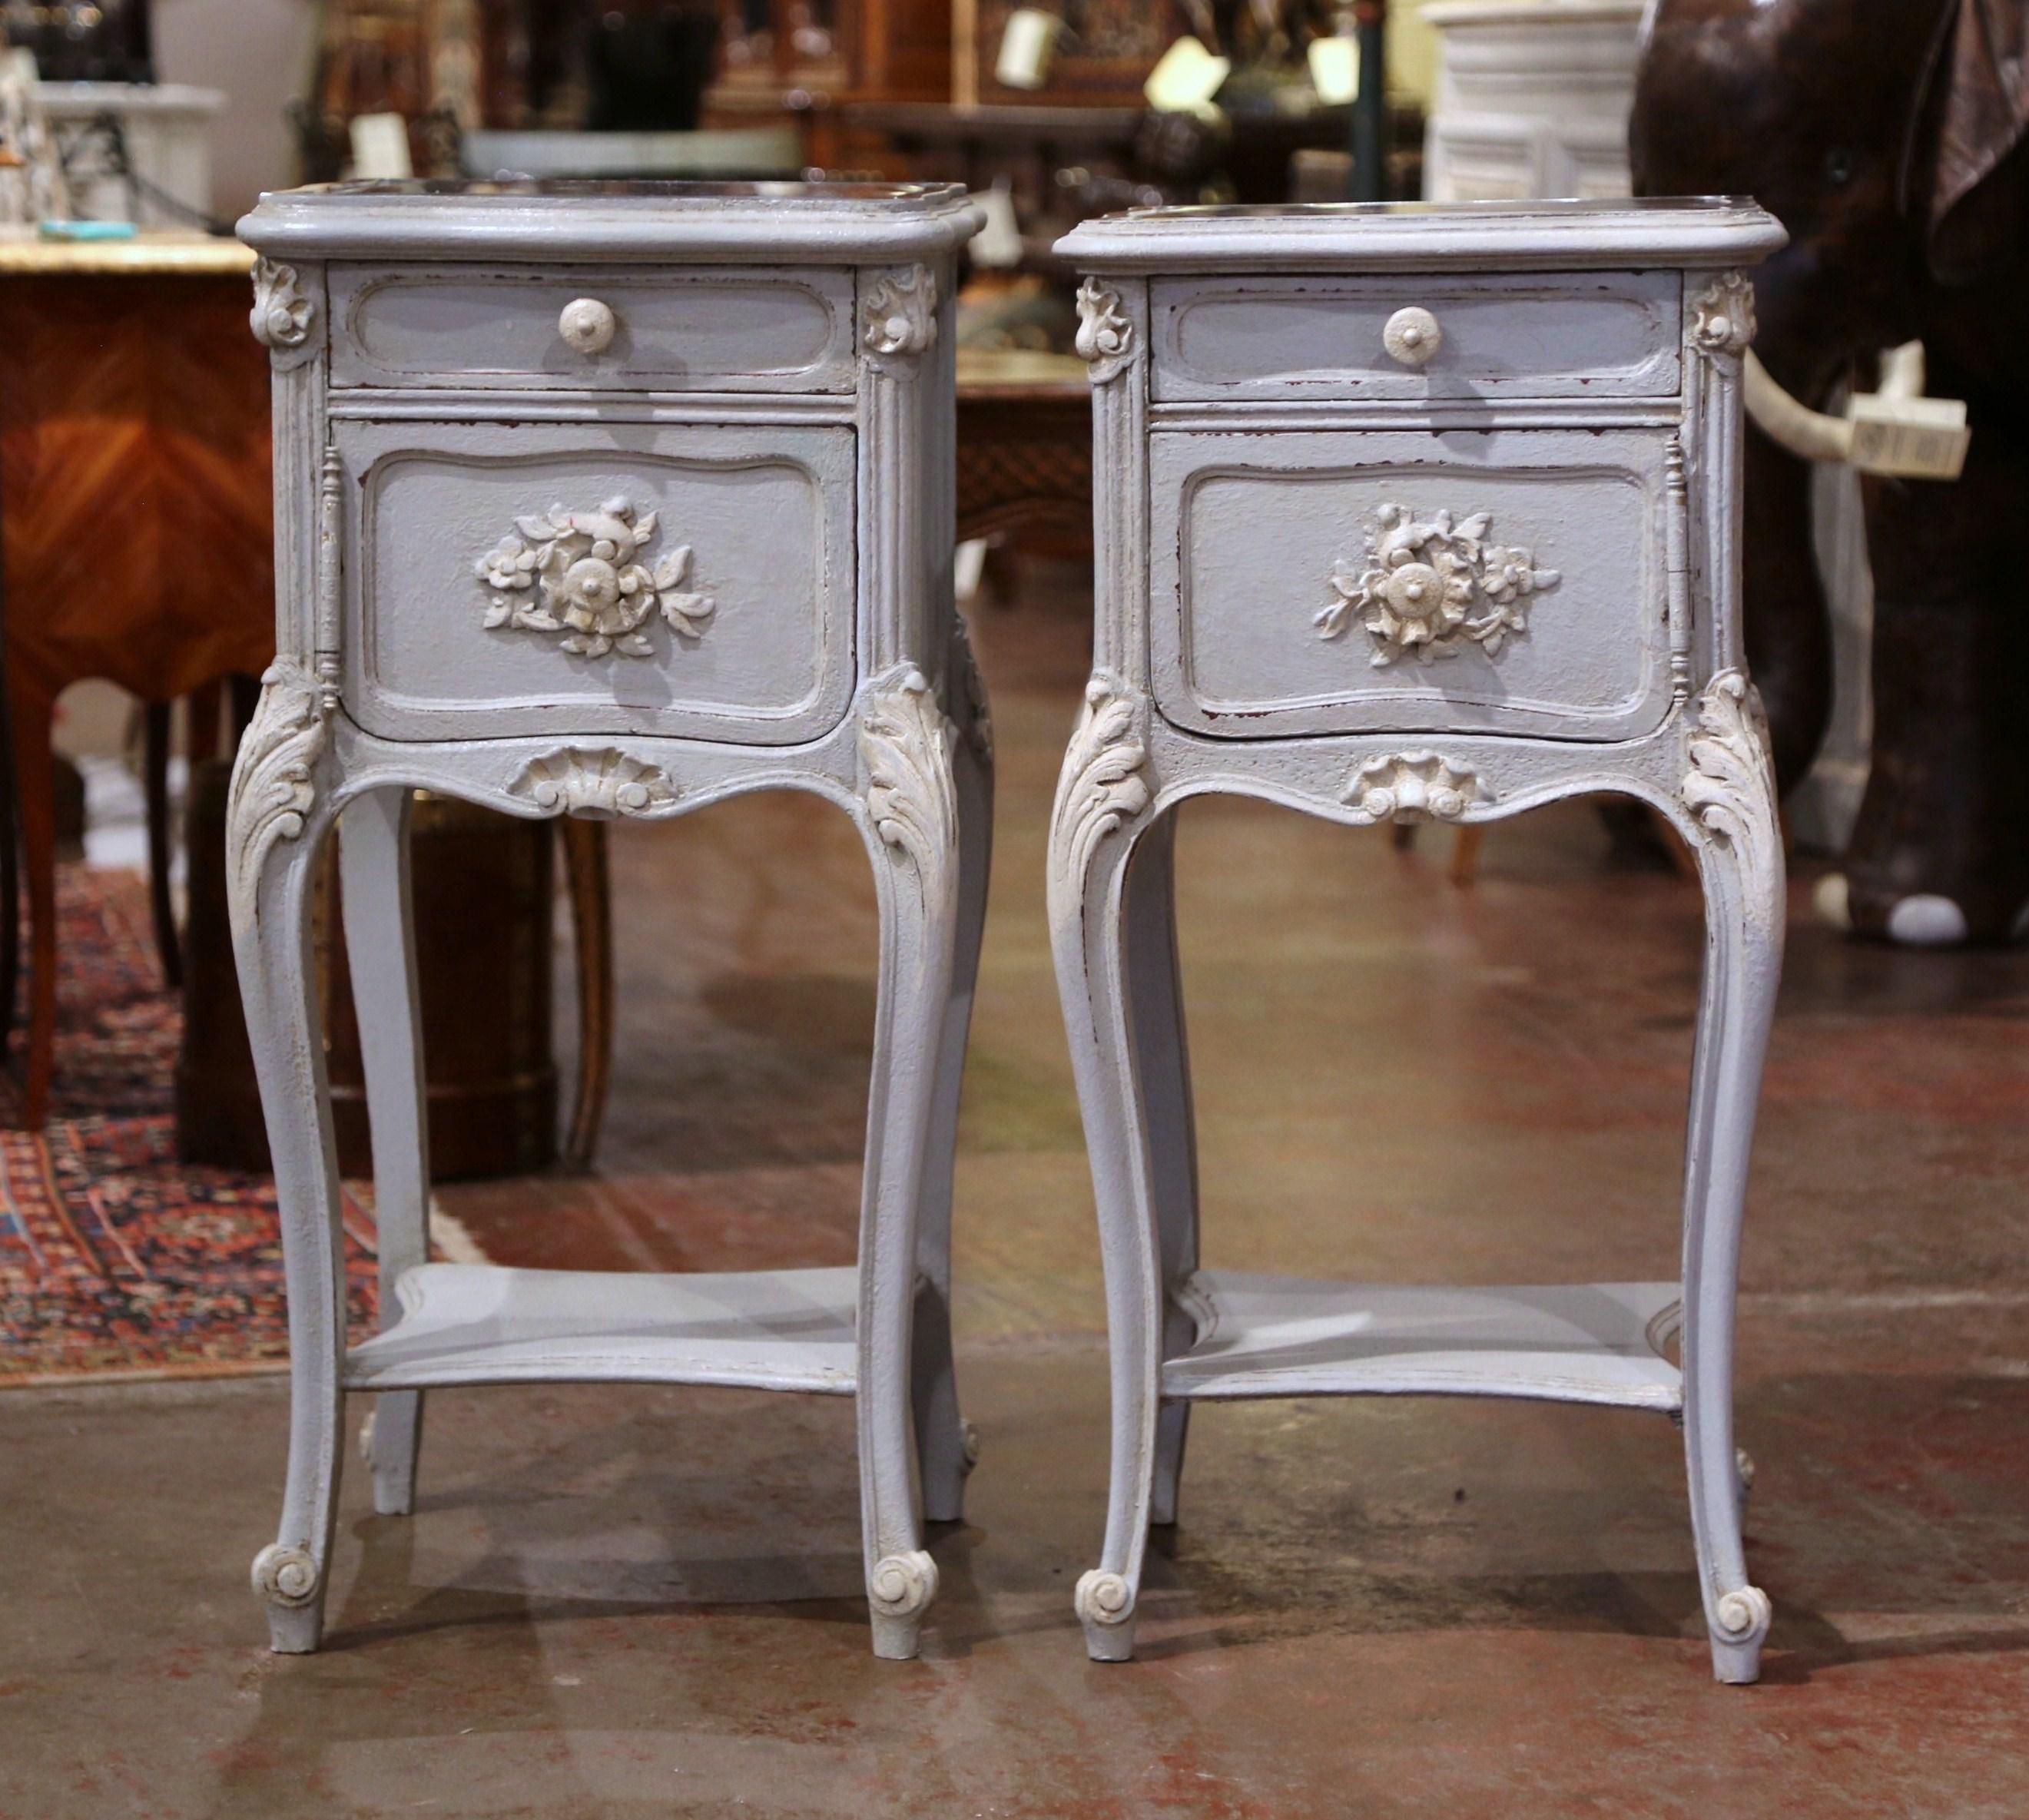 Complete your bedroom with this elegant pair of antique bedside tables from France, crafted, circa 1880. The tables are almost square in shape and are hand painted in a grey-blue and white palette. Each small cabinet stands on cabriole legs with